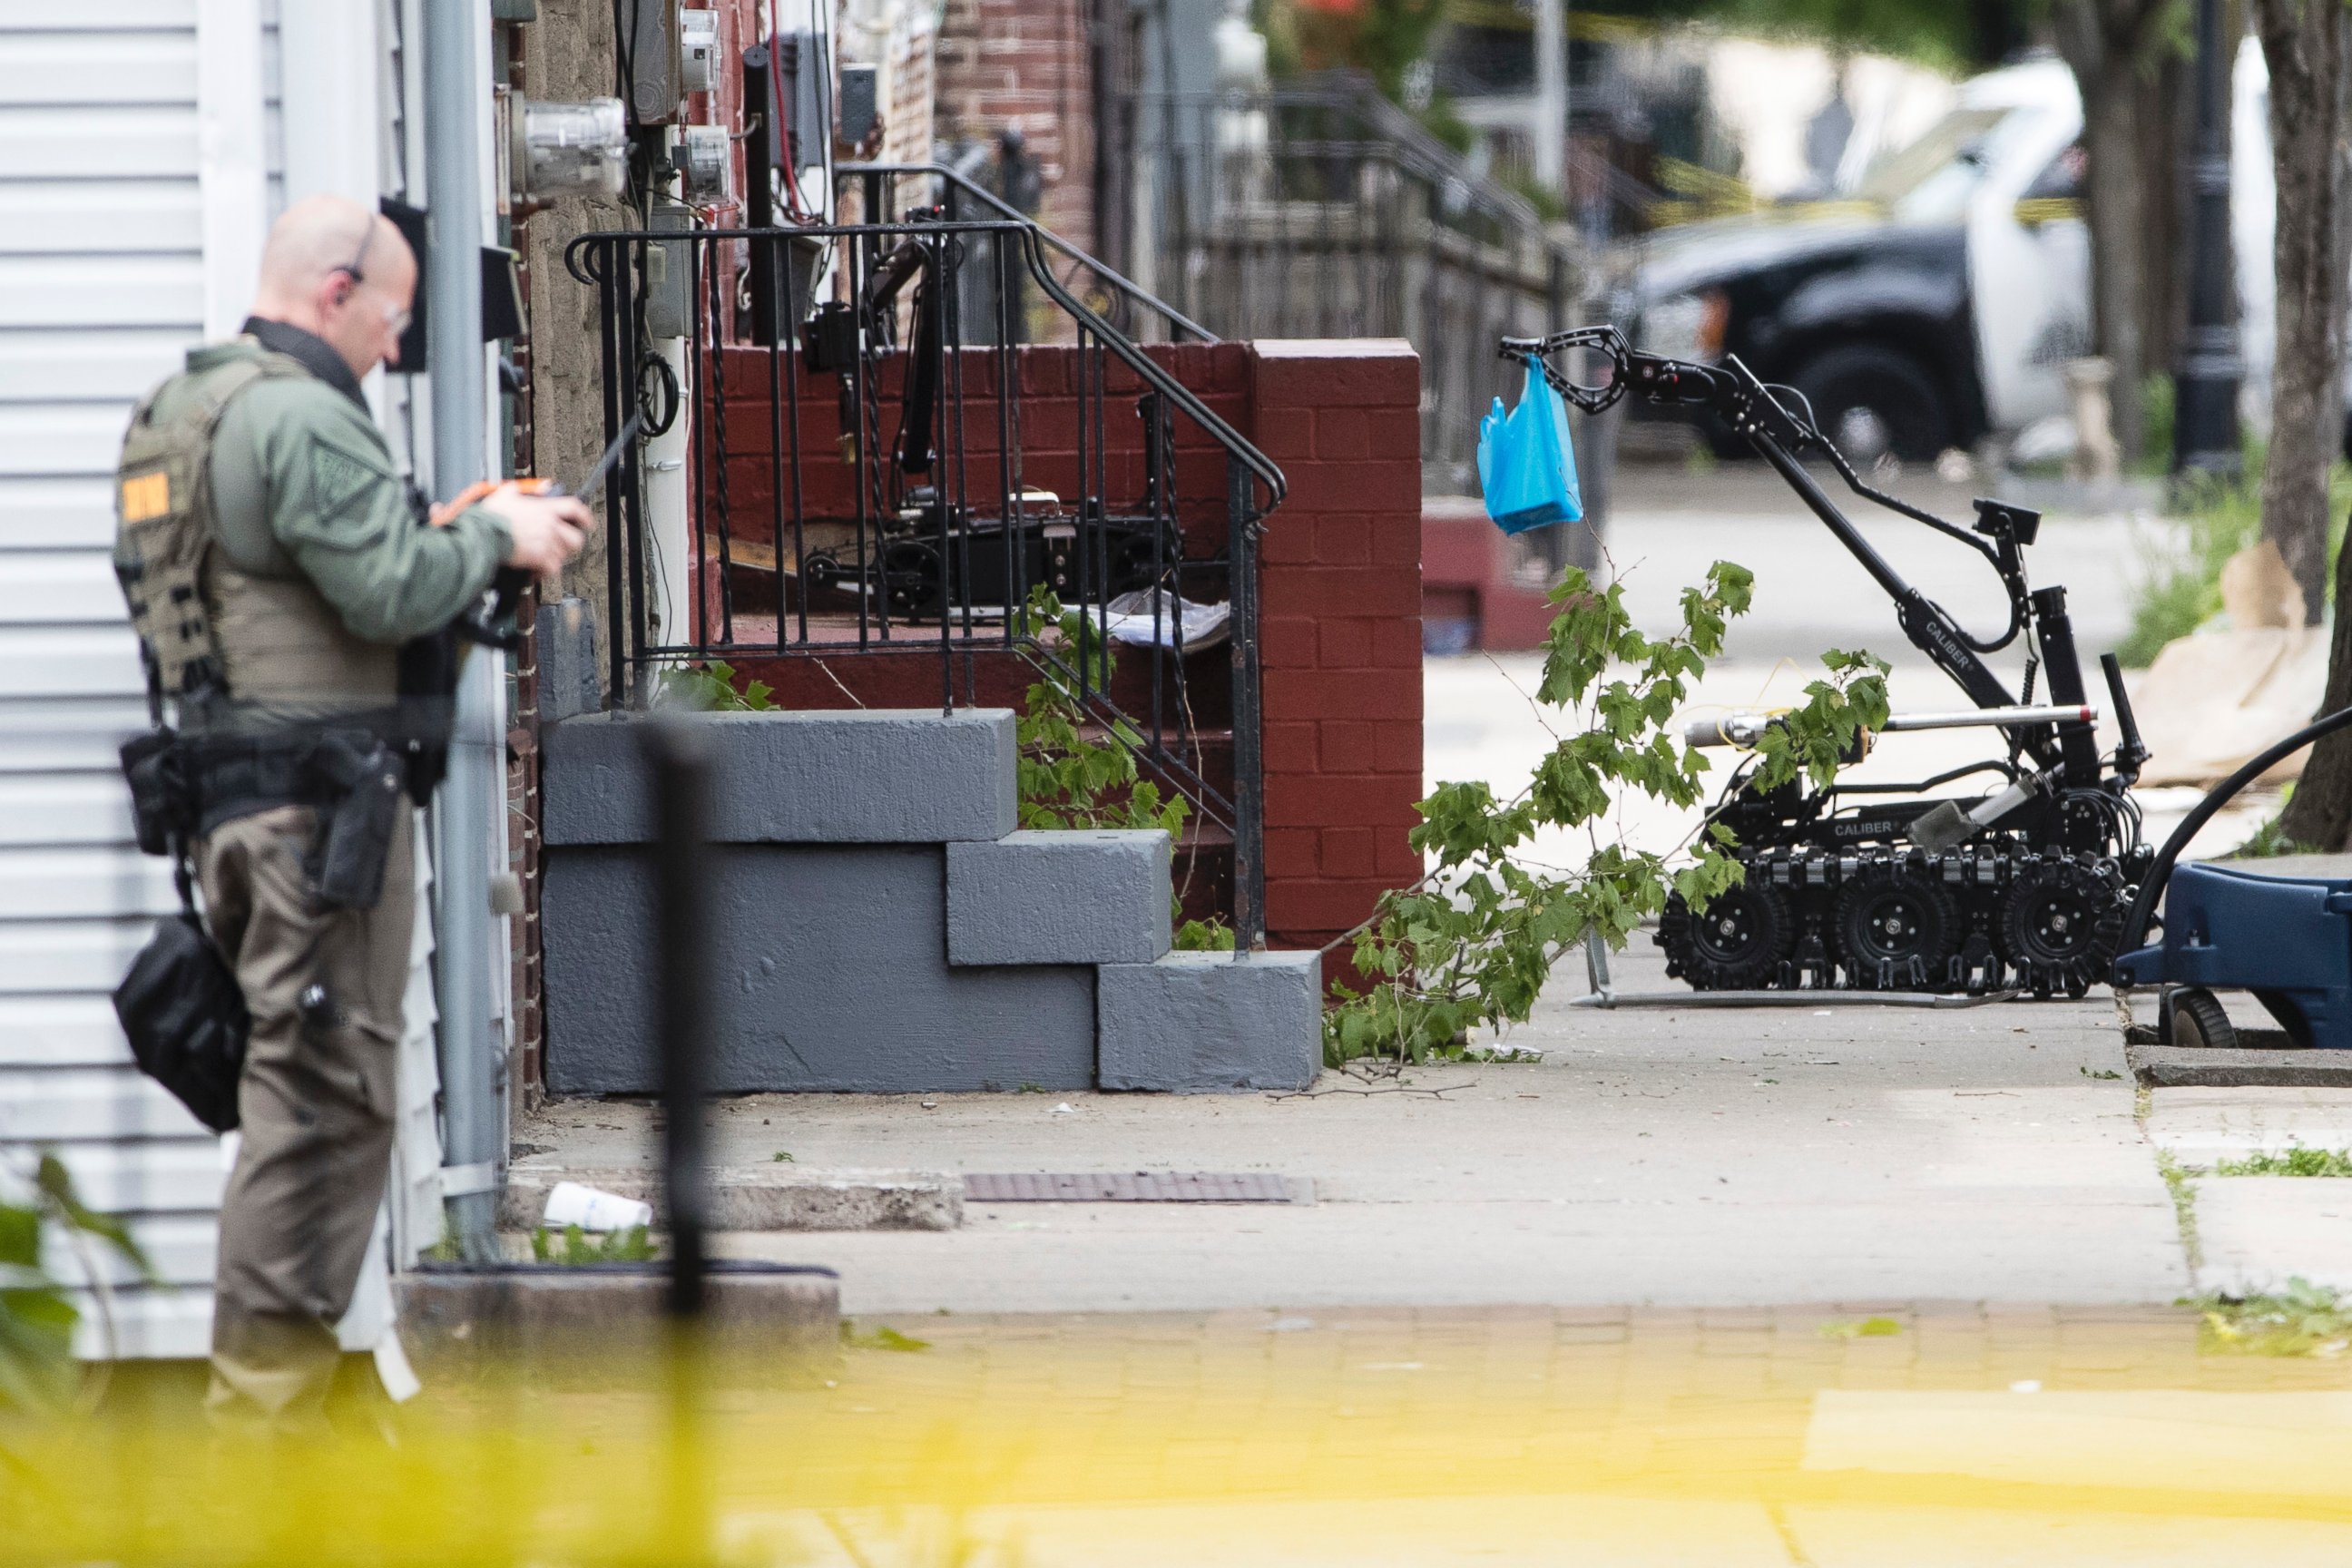 PHOTO: A police officer operates a robot during a standoff with a man in a home in Trenton, N.J., on May 10, 2017. 